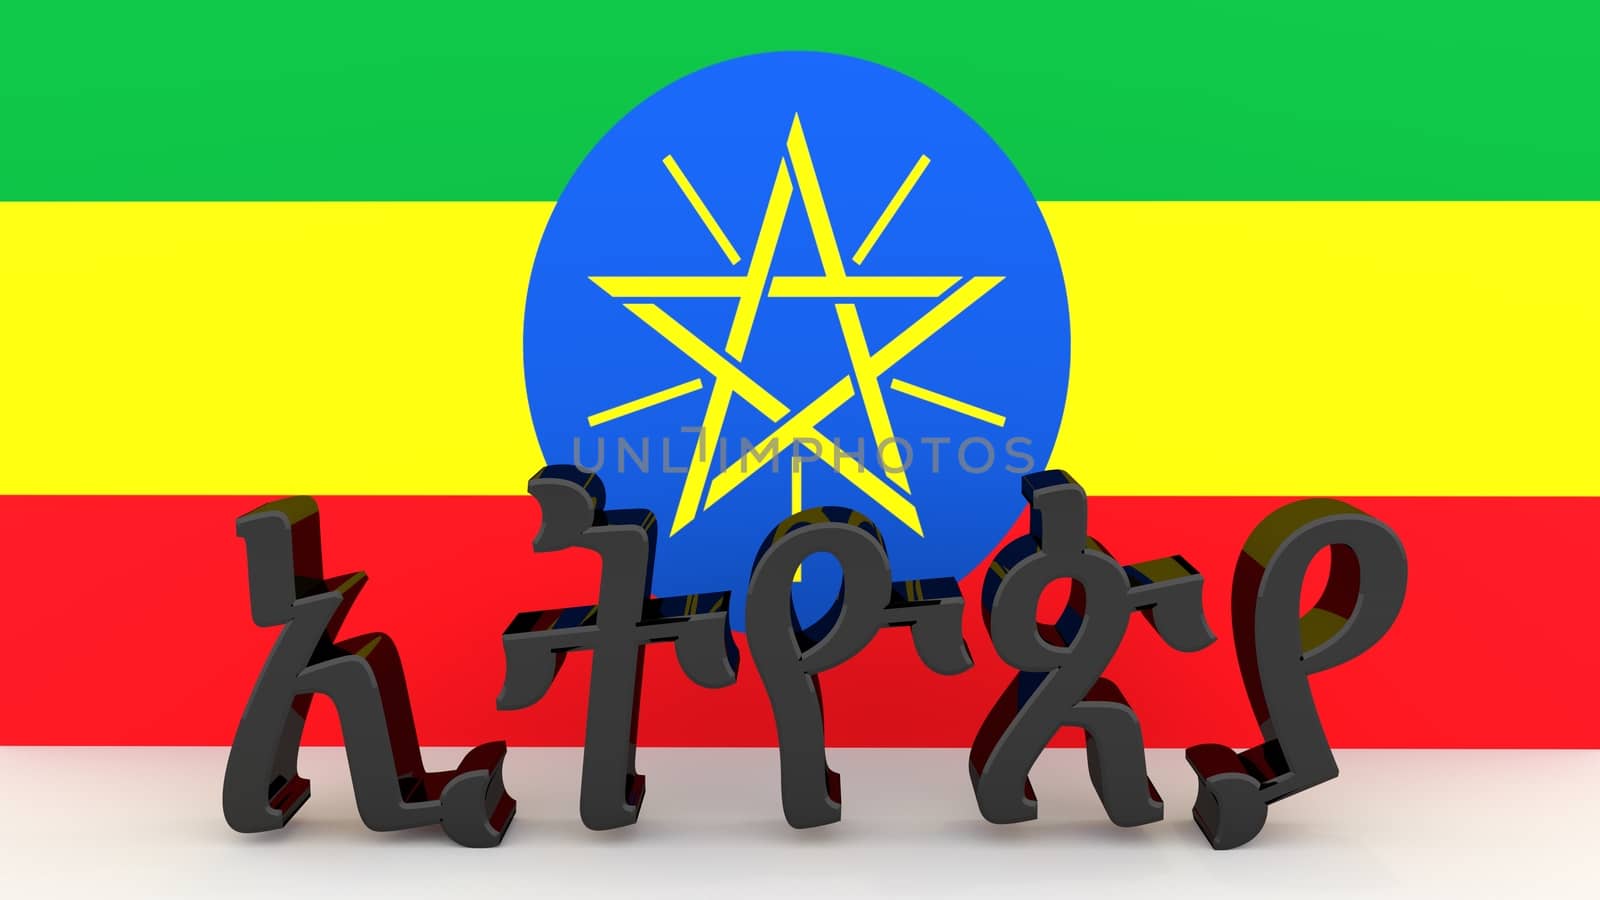 Amharic characters made of dark metal meaning Ethiopia in front of an ethiopian flag. Amharic is the official working language of the Federal Democratic Republic of Ethiopia.